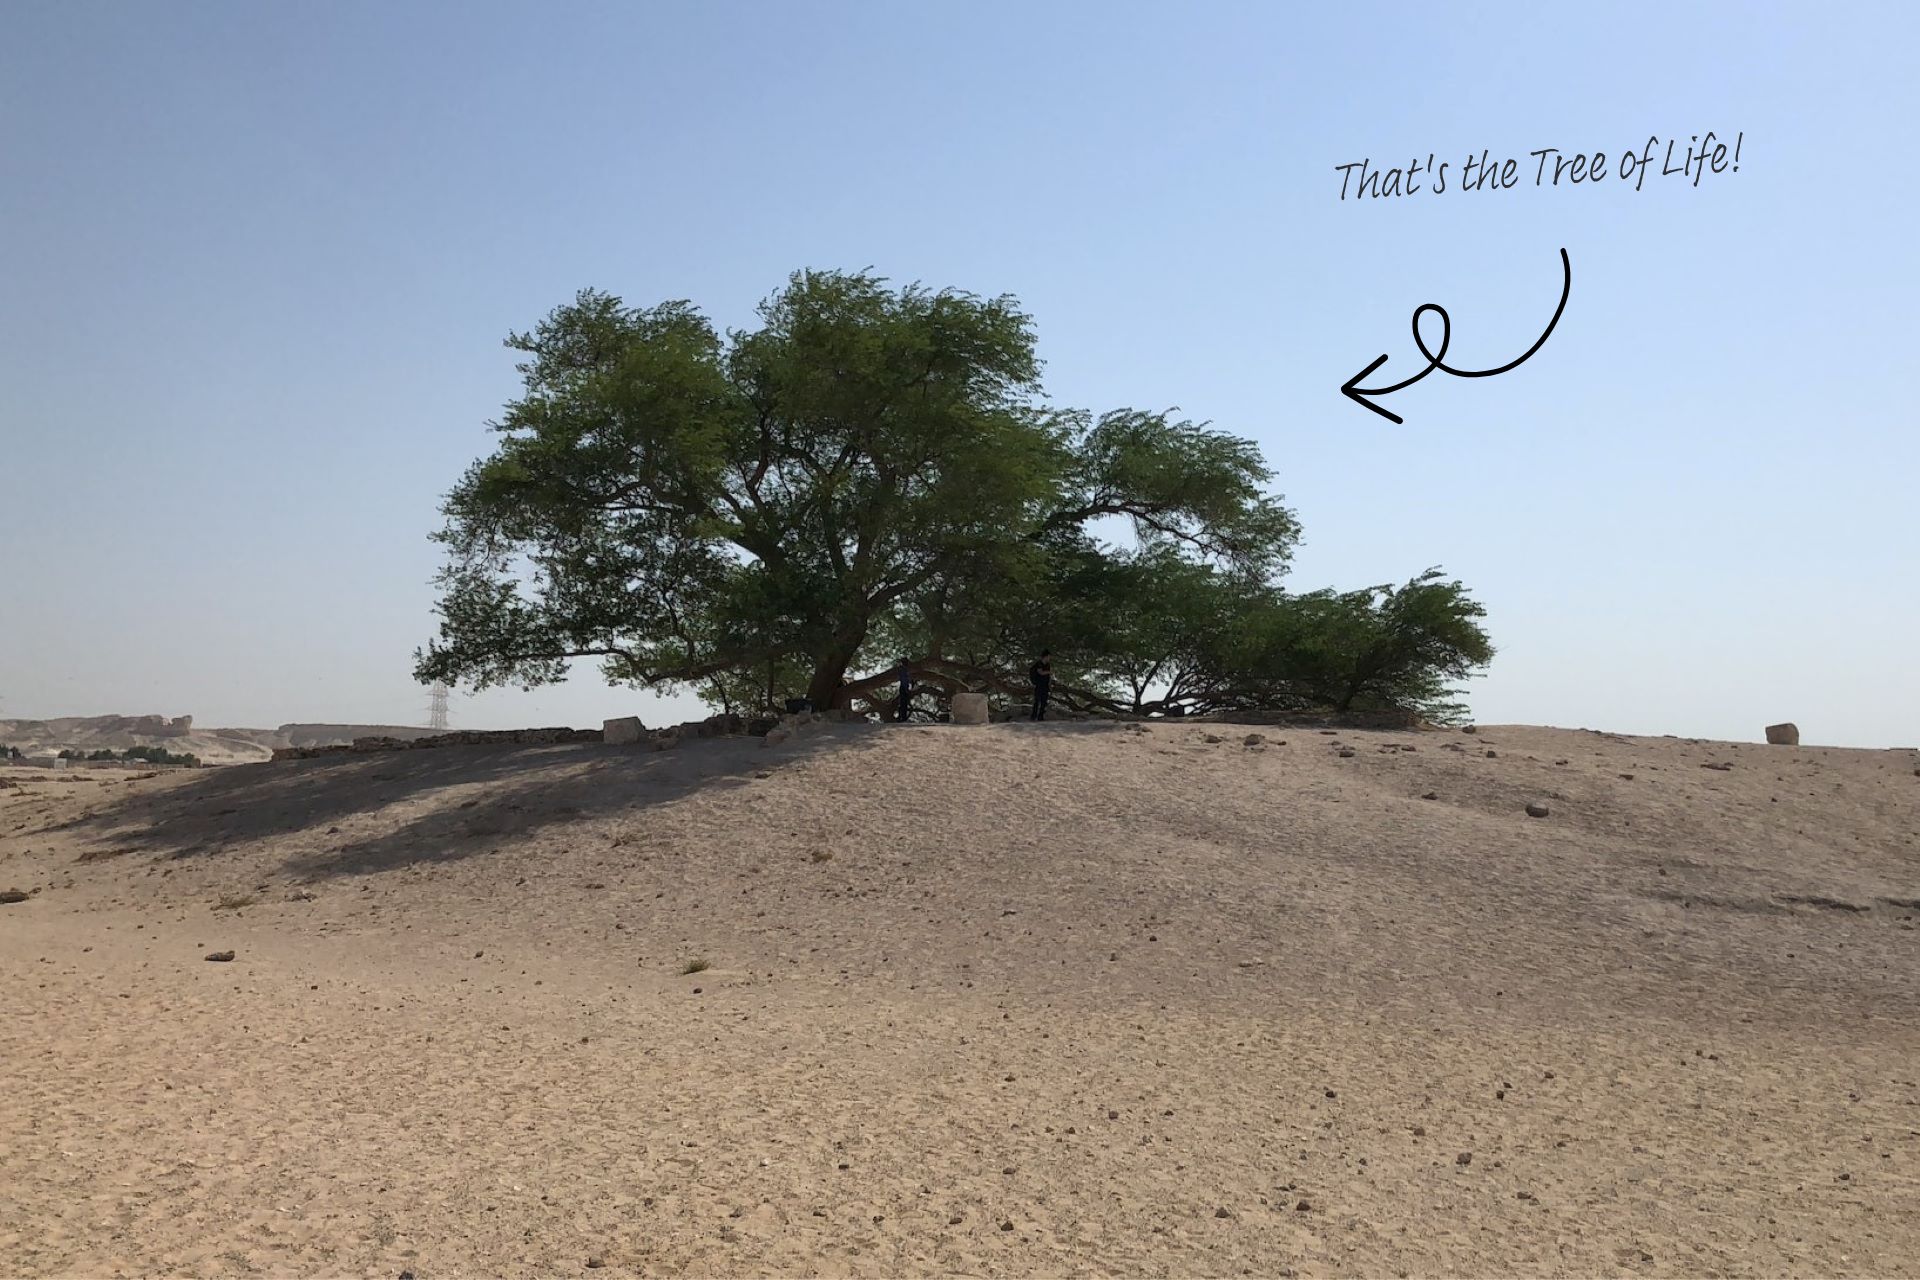 The Tree of Life stands in the desert.